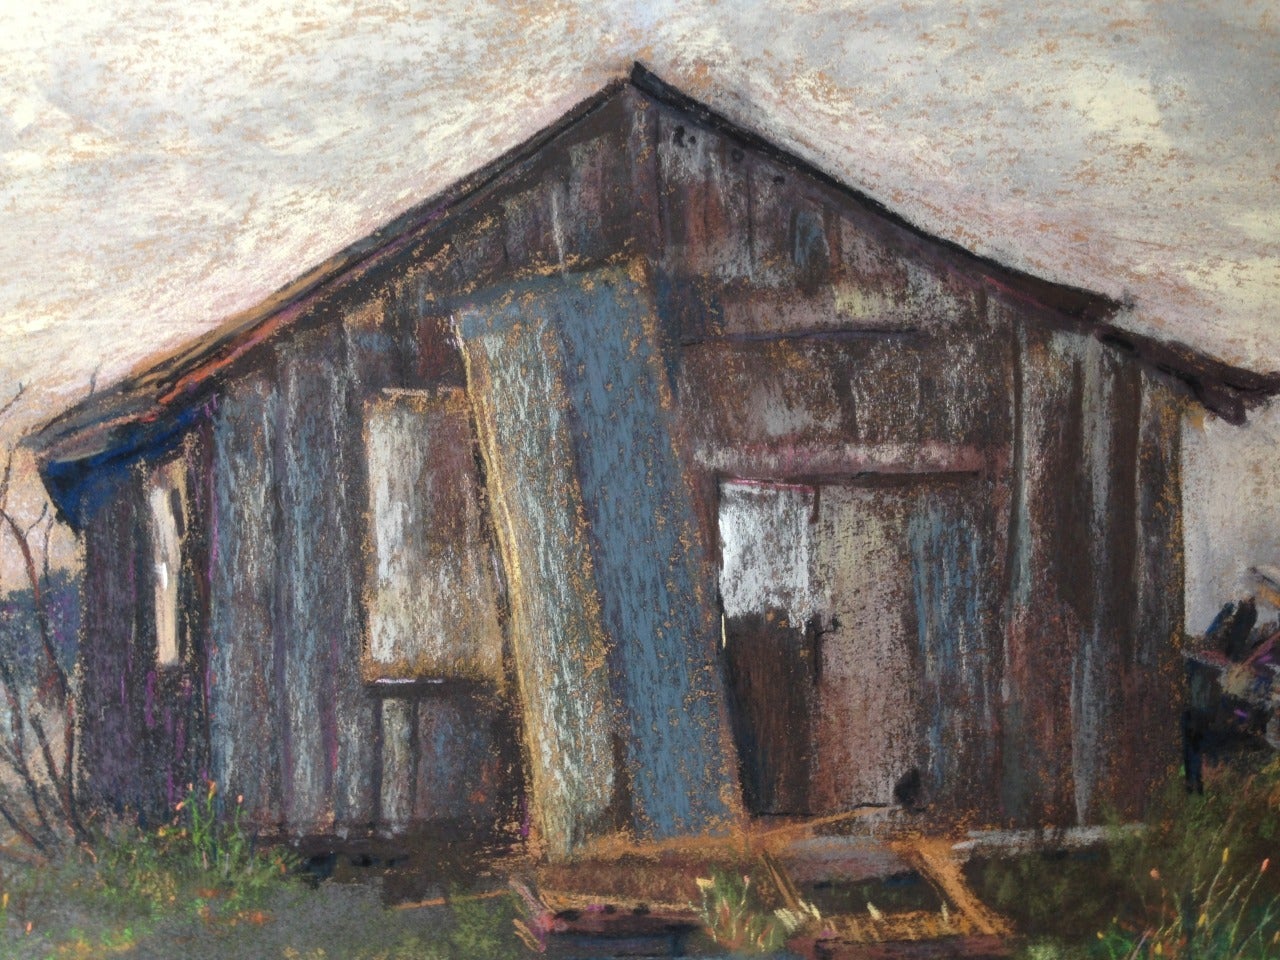 The Old Shed - Painting by Paul Morgan Gustin